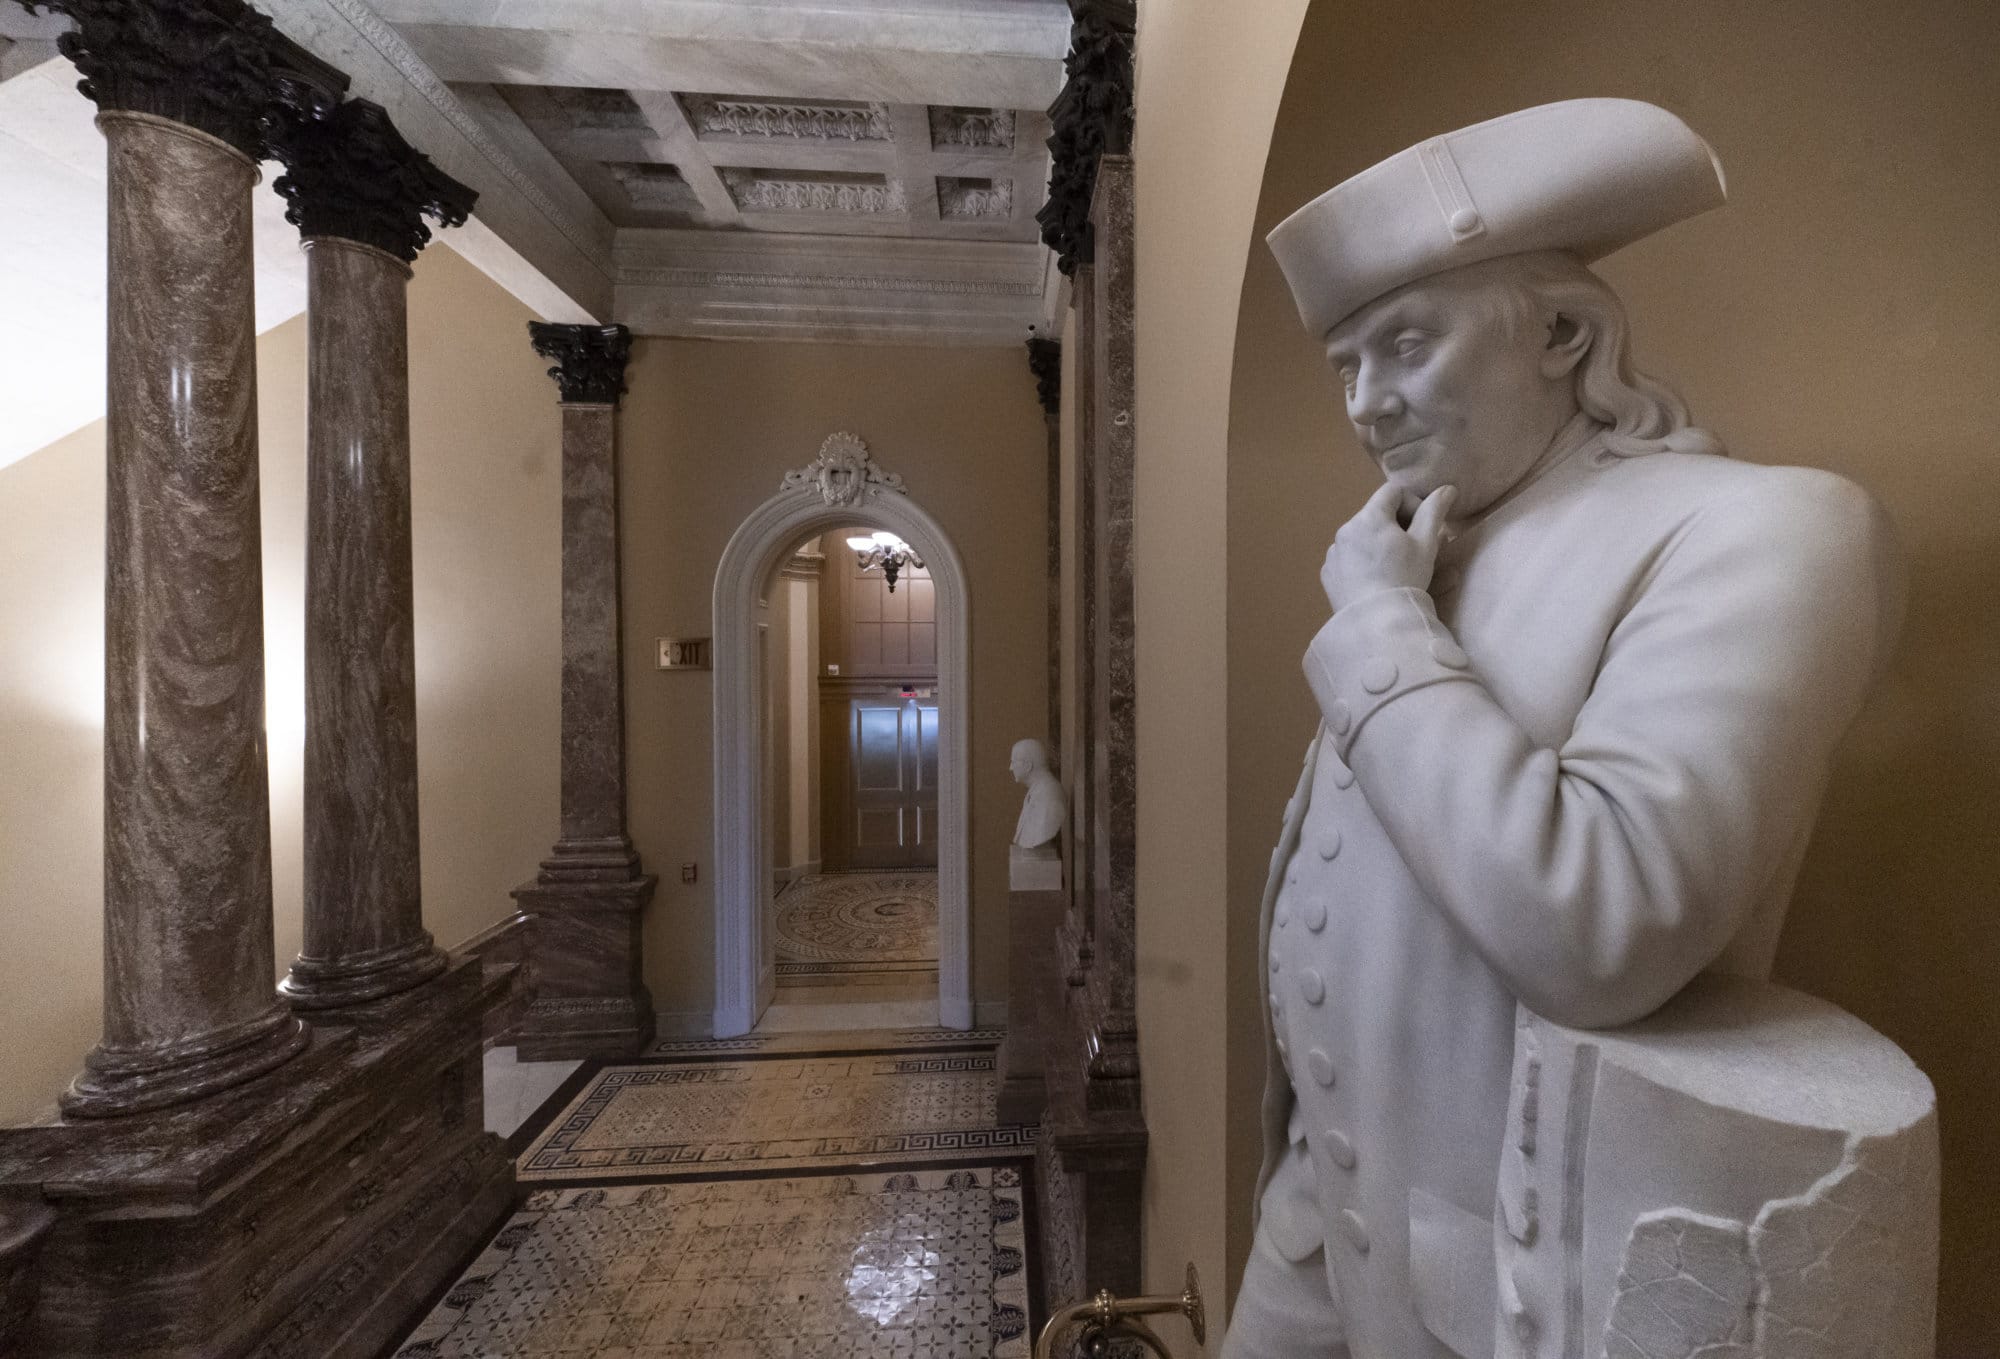 A statue of Benjamin Franklin is seen in an empty corridor outside the Senate at the Capitol in Washington, Thursday, Dec. 27, 2018, during a partial government shutdown. Chances look slim for ending the partial government shutdown any time soon. Lawmakers are away from Washington for the holidays and have been told they will get 24 hours' notice before having to return for a vote. (AP Photo/J. Scott Applewhite)